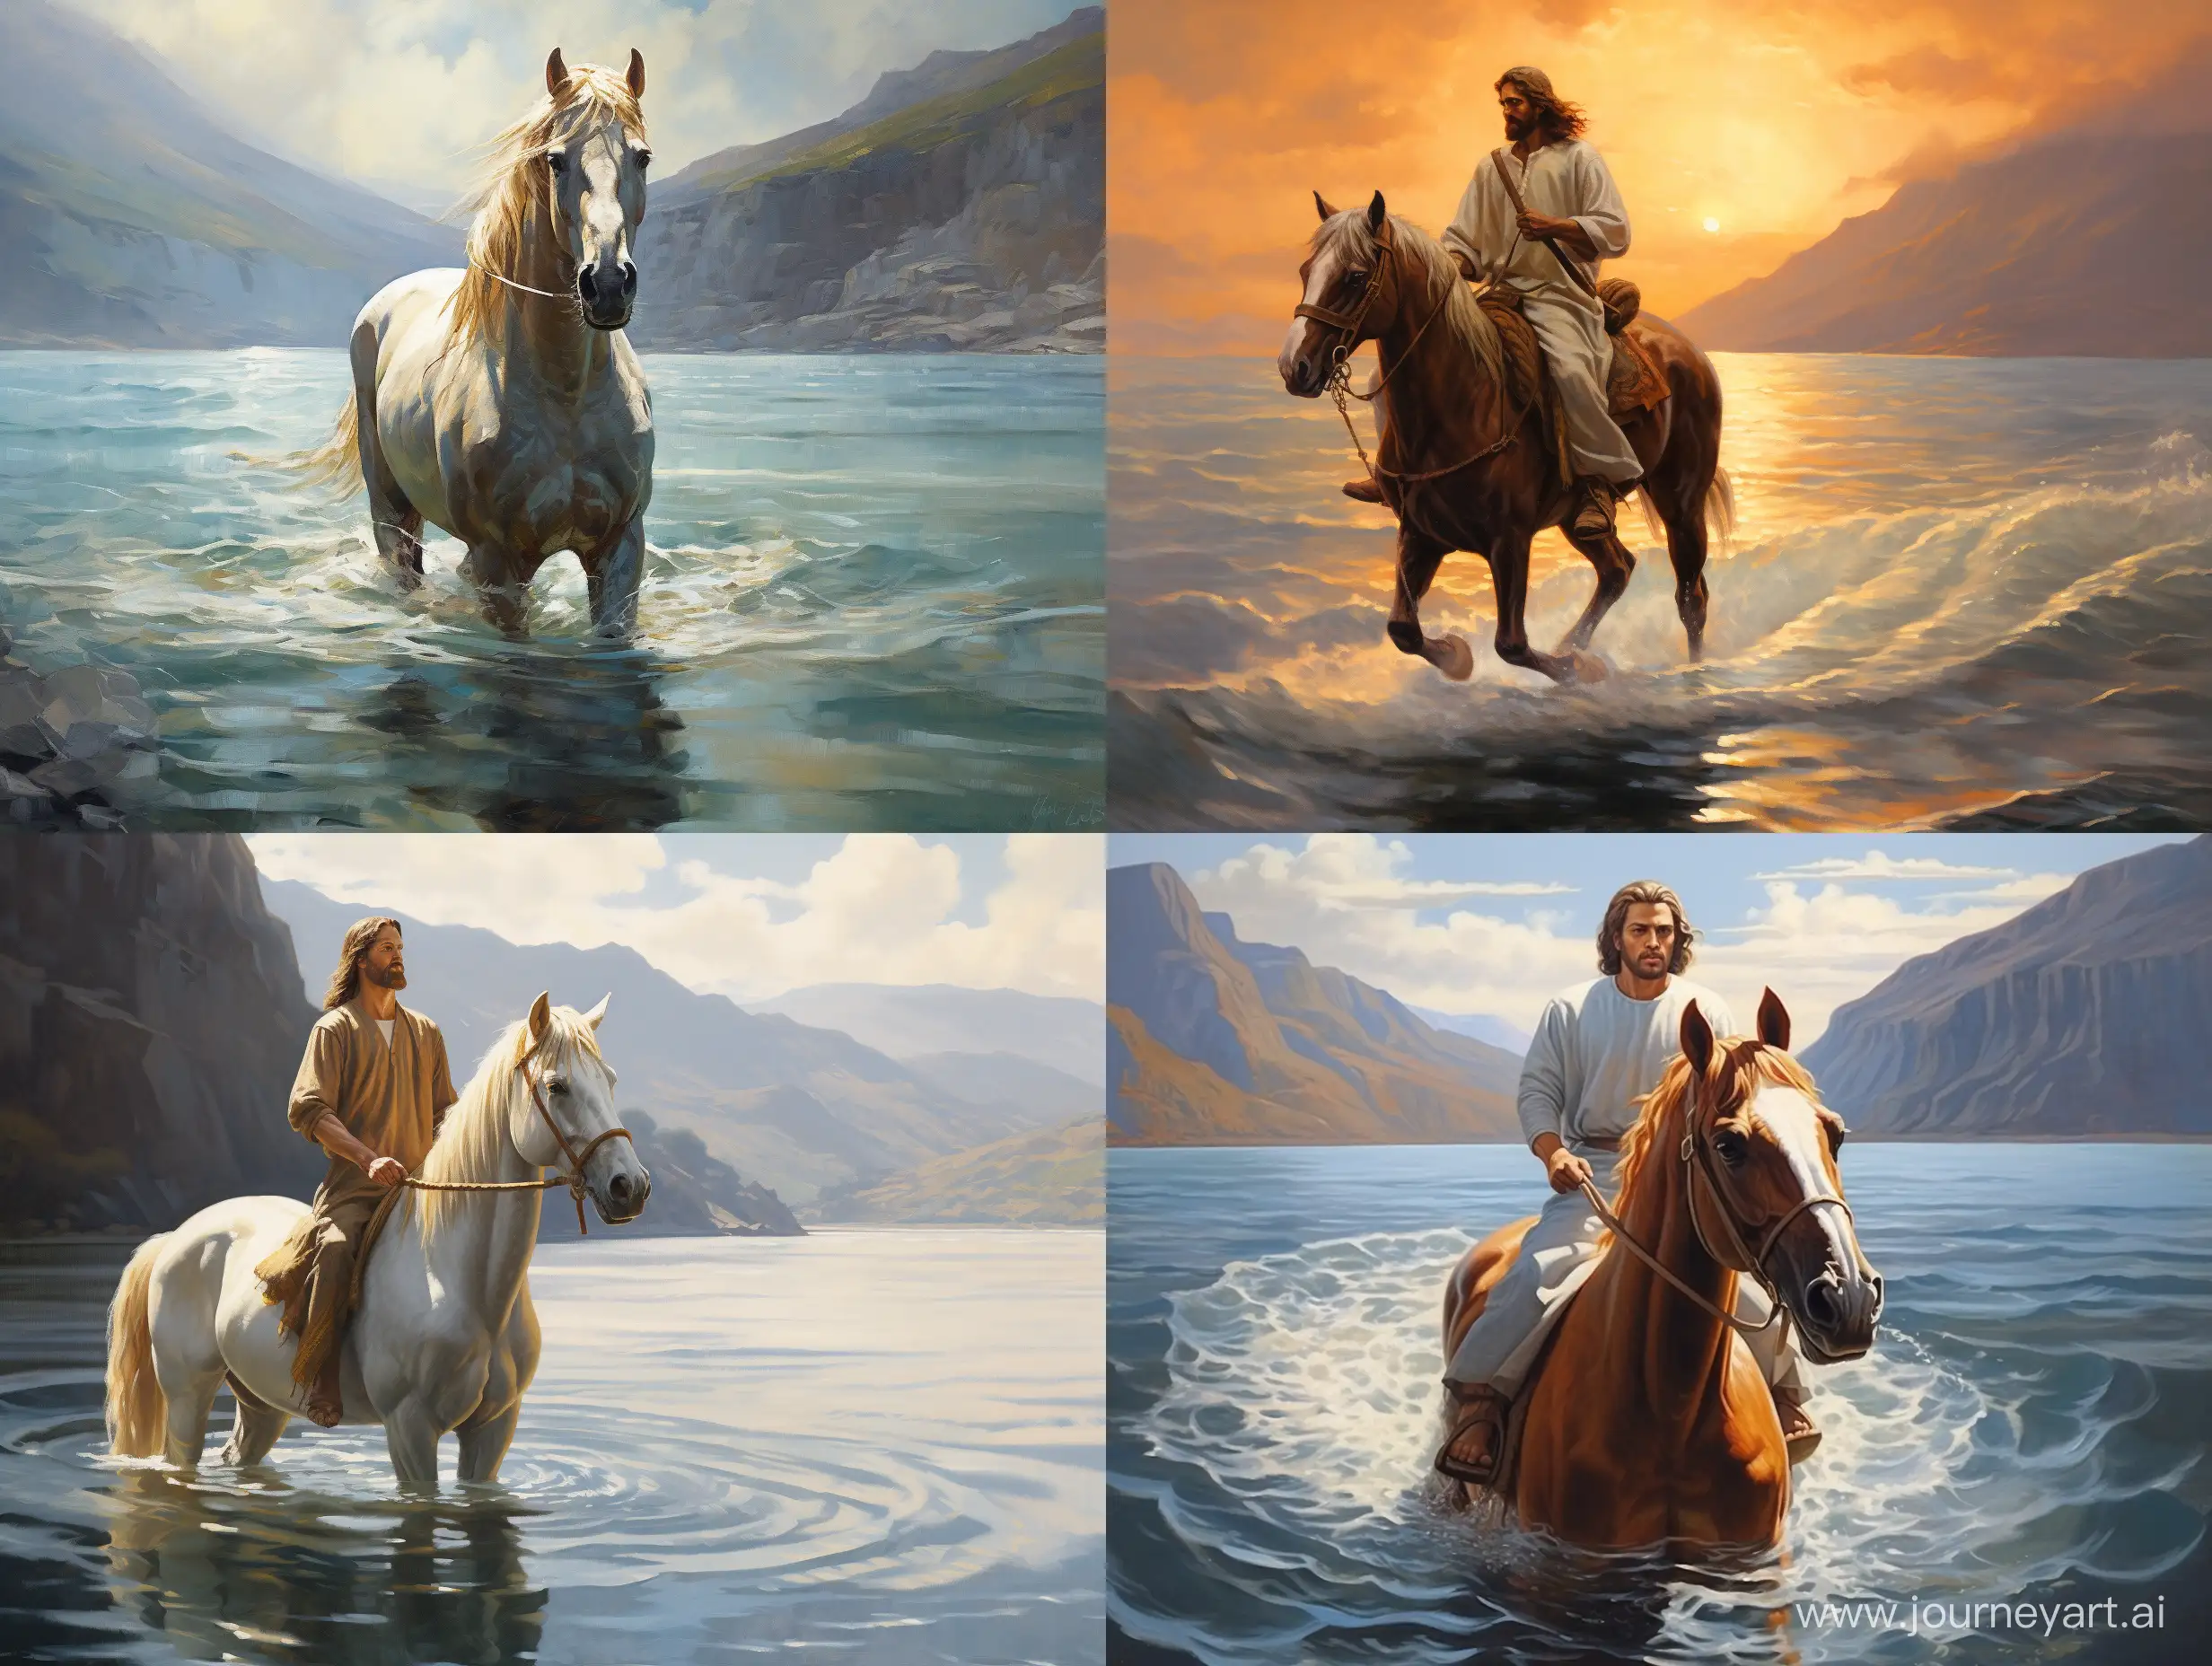 Jesus-Riding-a-Majestic-Horse-on-the-Tranquil-Sea-of-Galilee